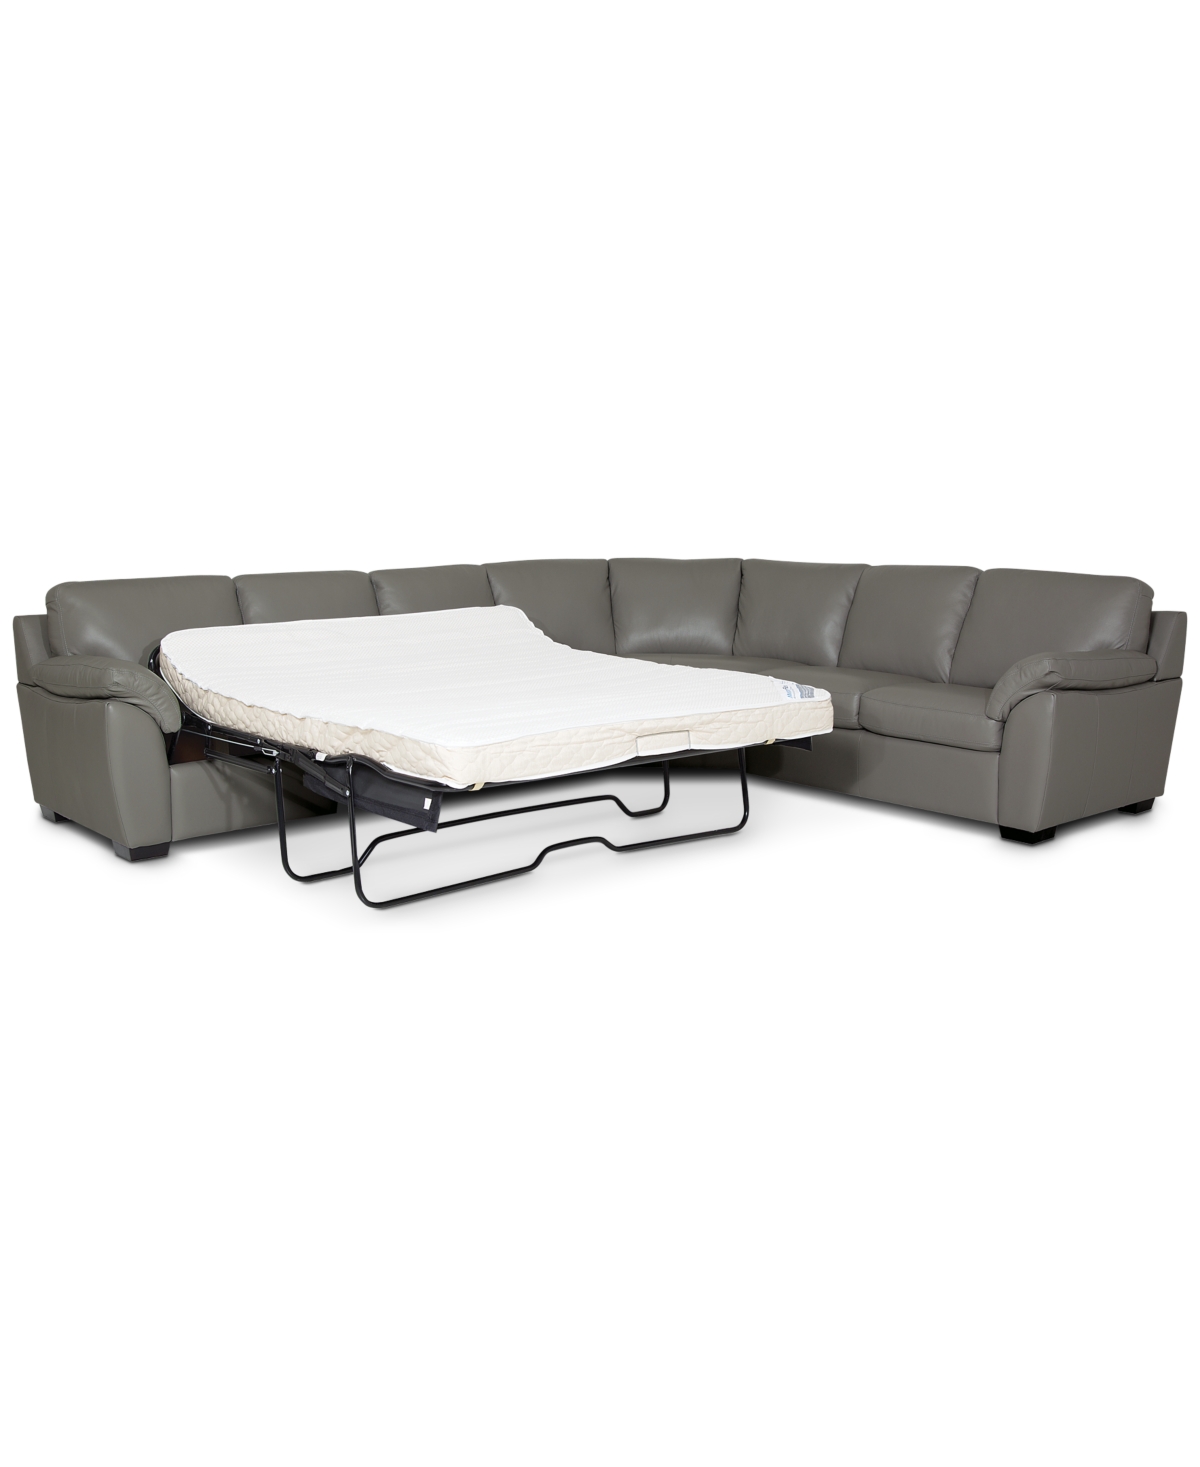 Leather Queen Sleeper Sectional Sofa